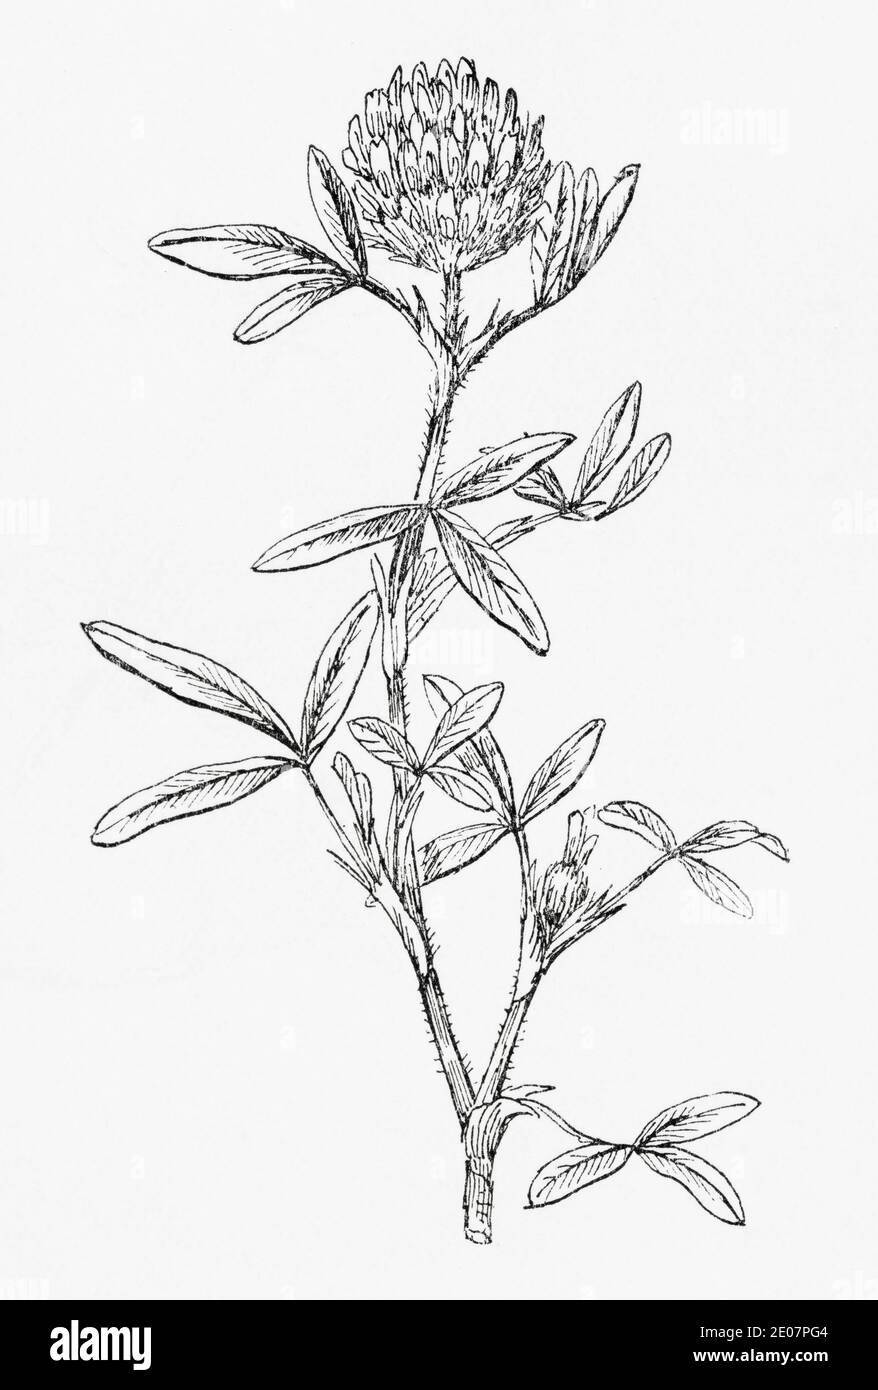 Old botanical illustration engraving of Meadow Clover, Zigzag Clover / Trifolium medium. See Notes Stock Photo